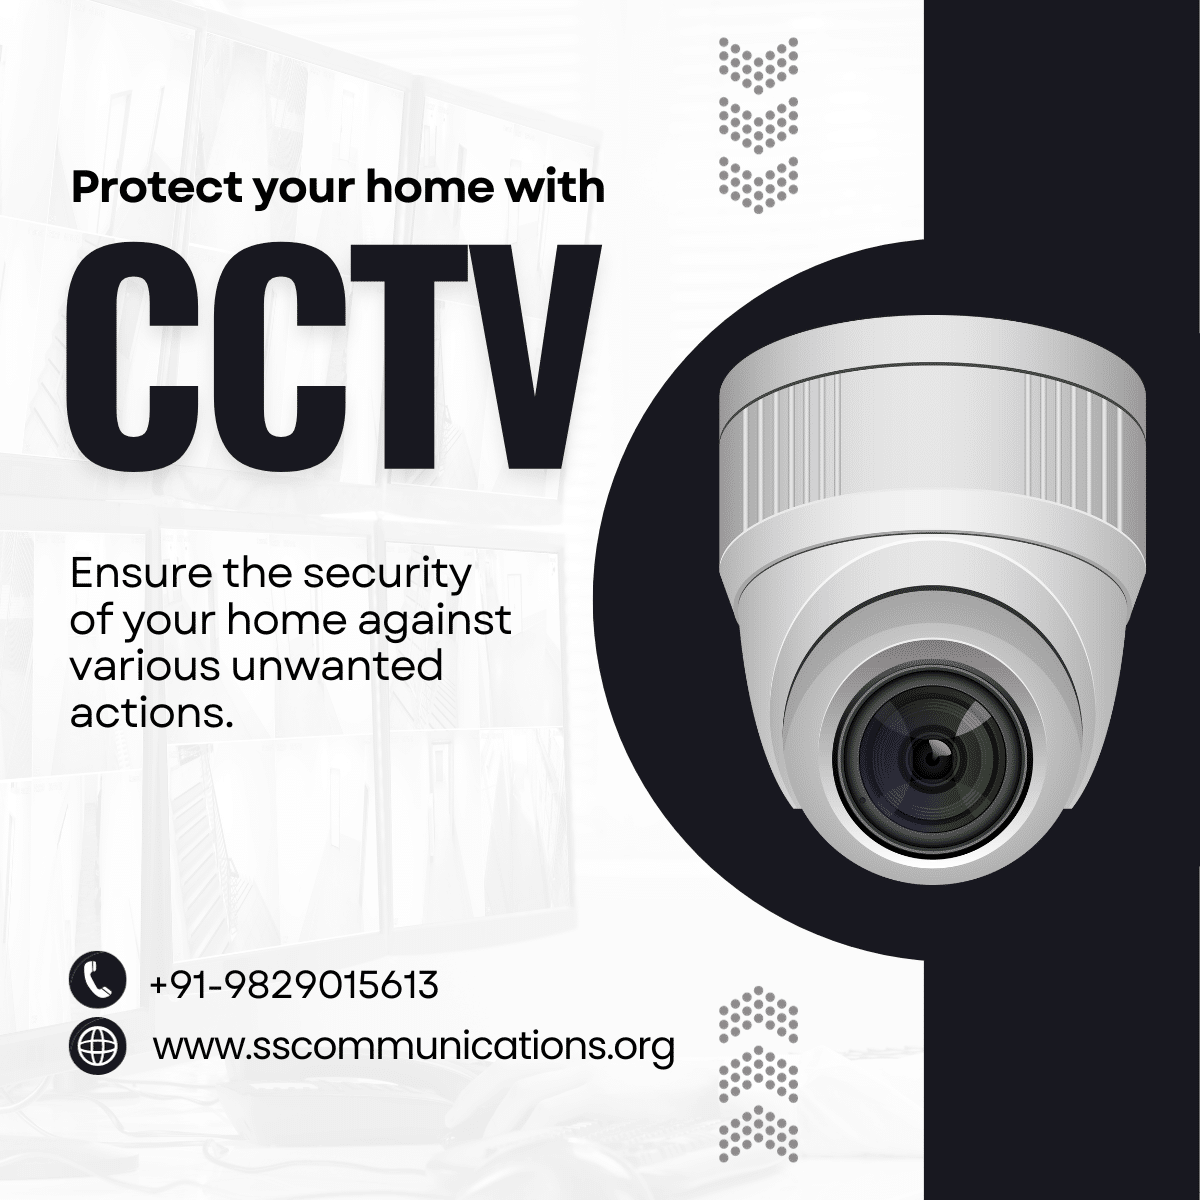 CCTV Camera Dealers in Jaipur - Protect Your Home with CCTV | SS Communications